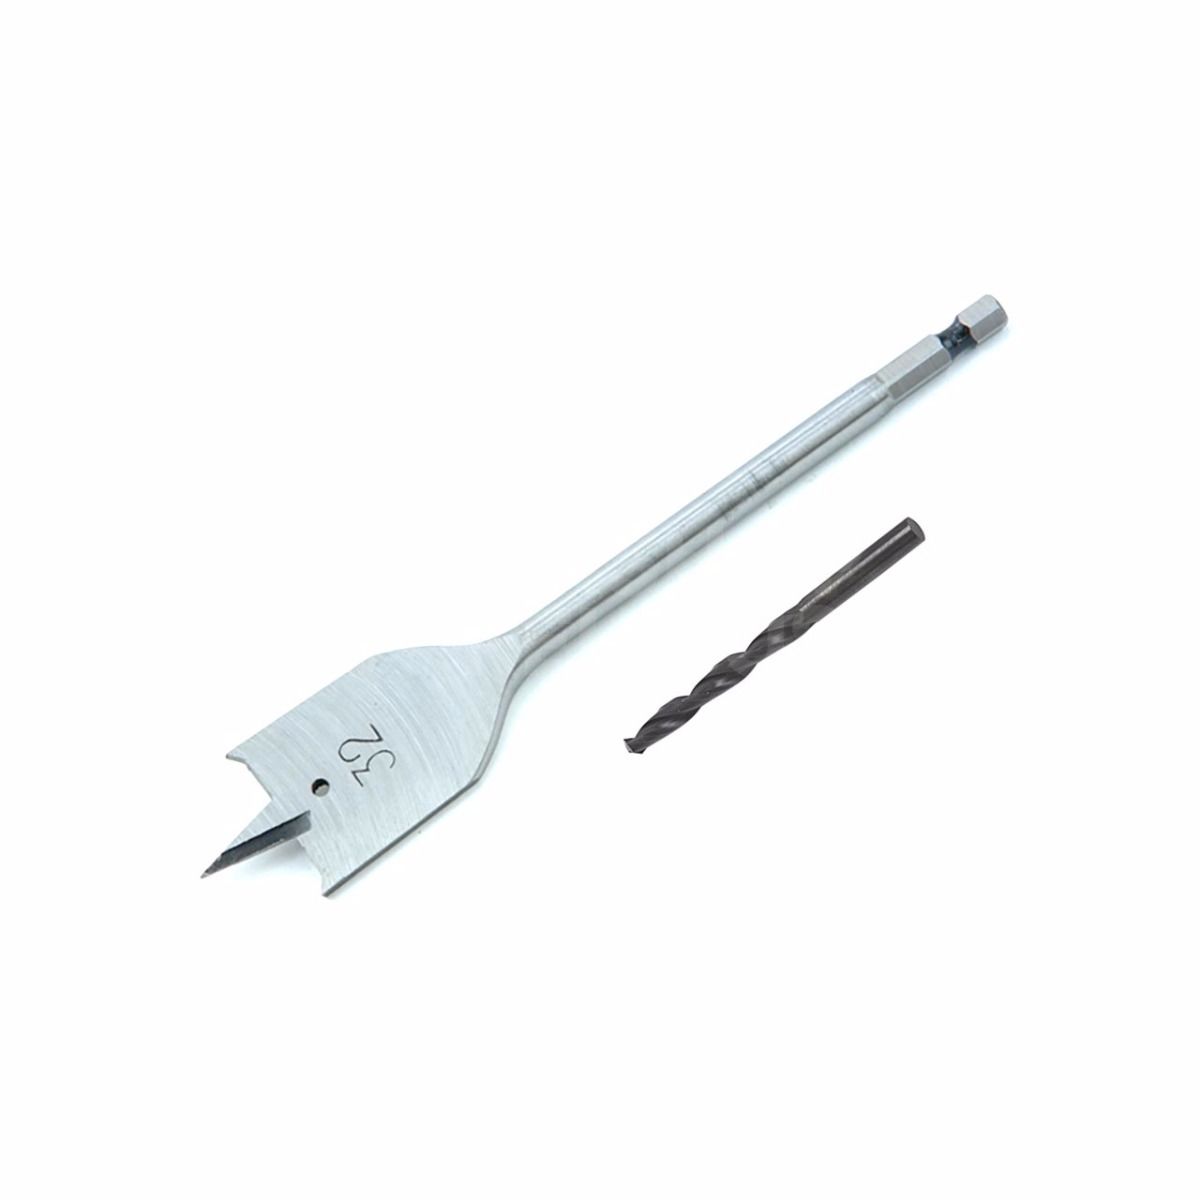 Suitable Size Drill Bits to fit Nightlatches